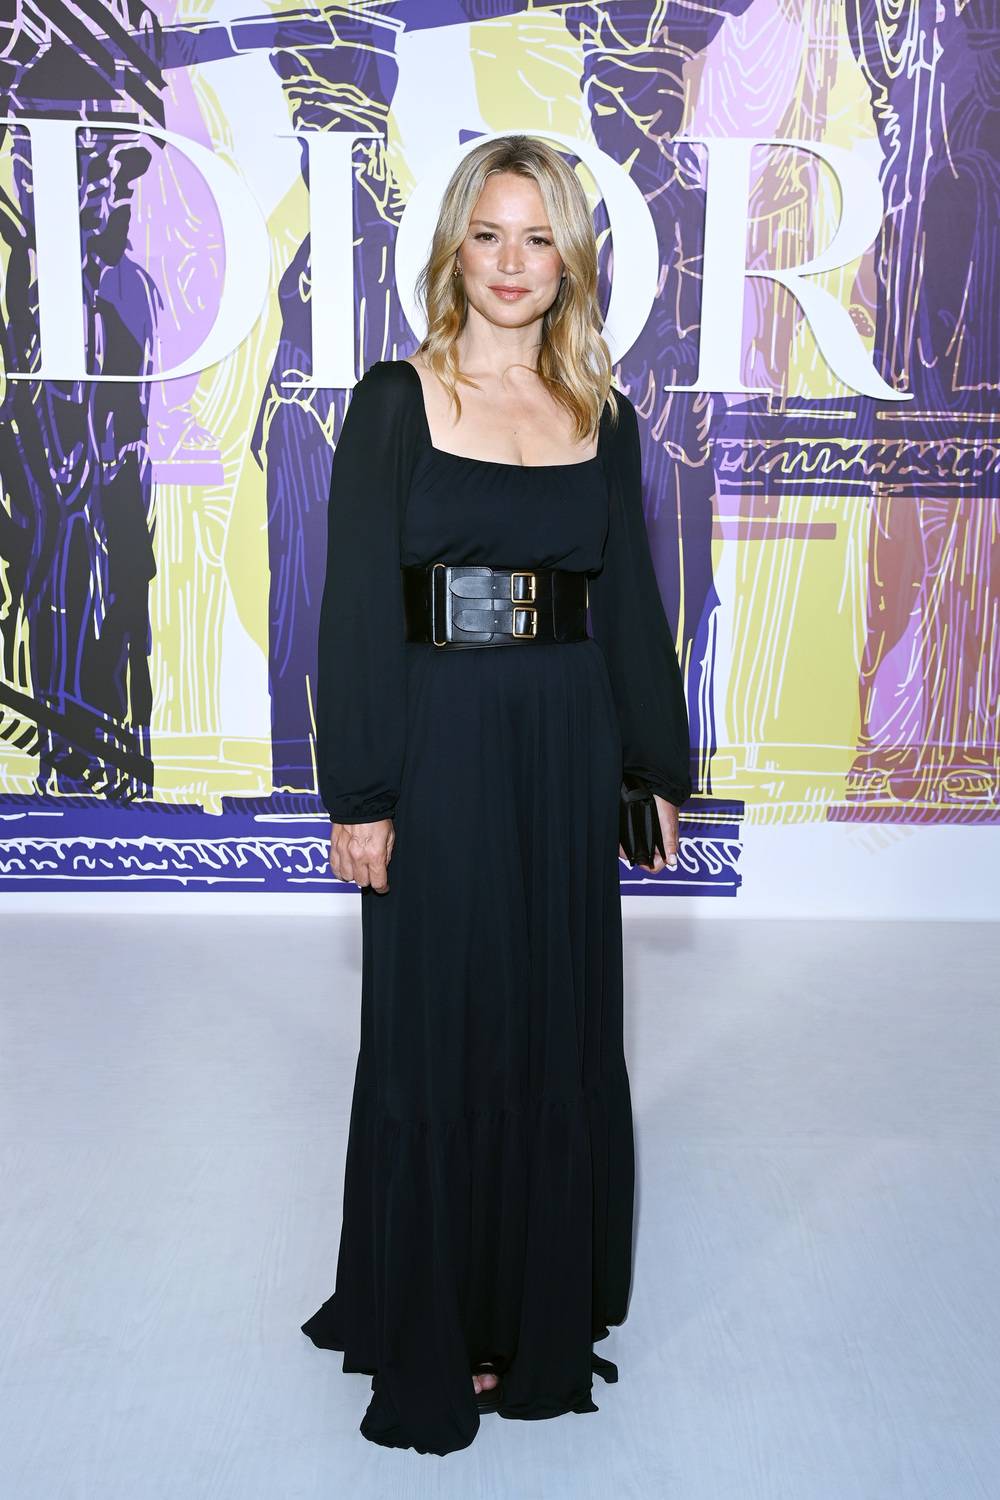 Virginie Efira wore a Dior Cruise 2021 black velvet long dress with a Dior black leather belt and Dior sandals.